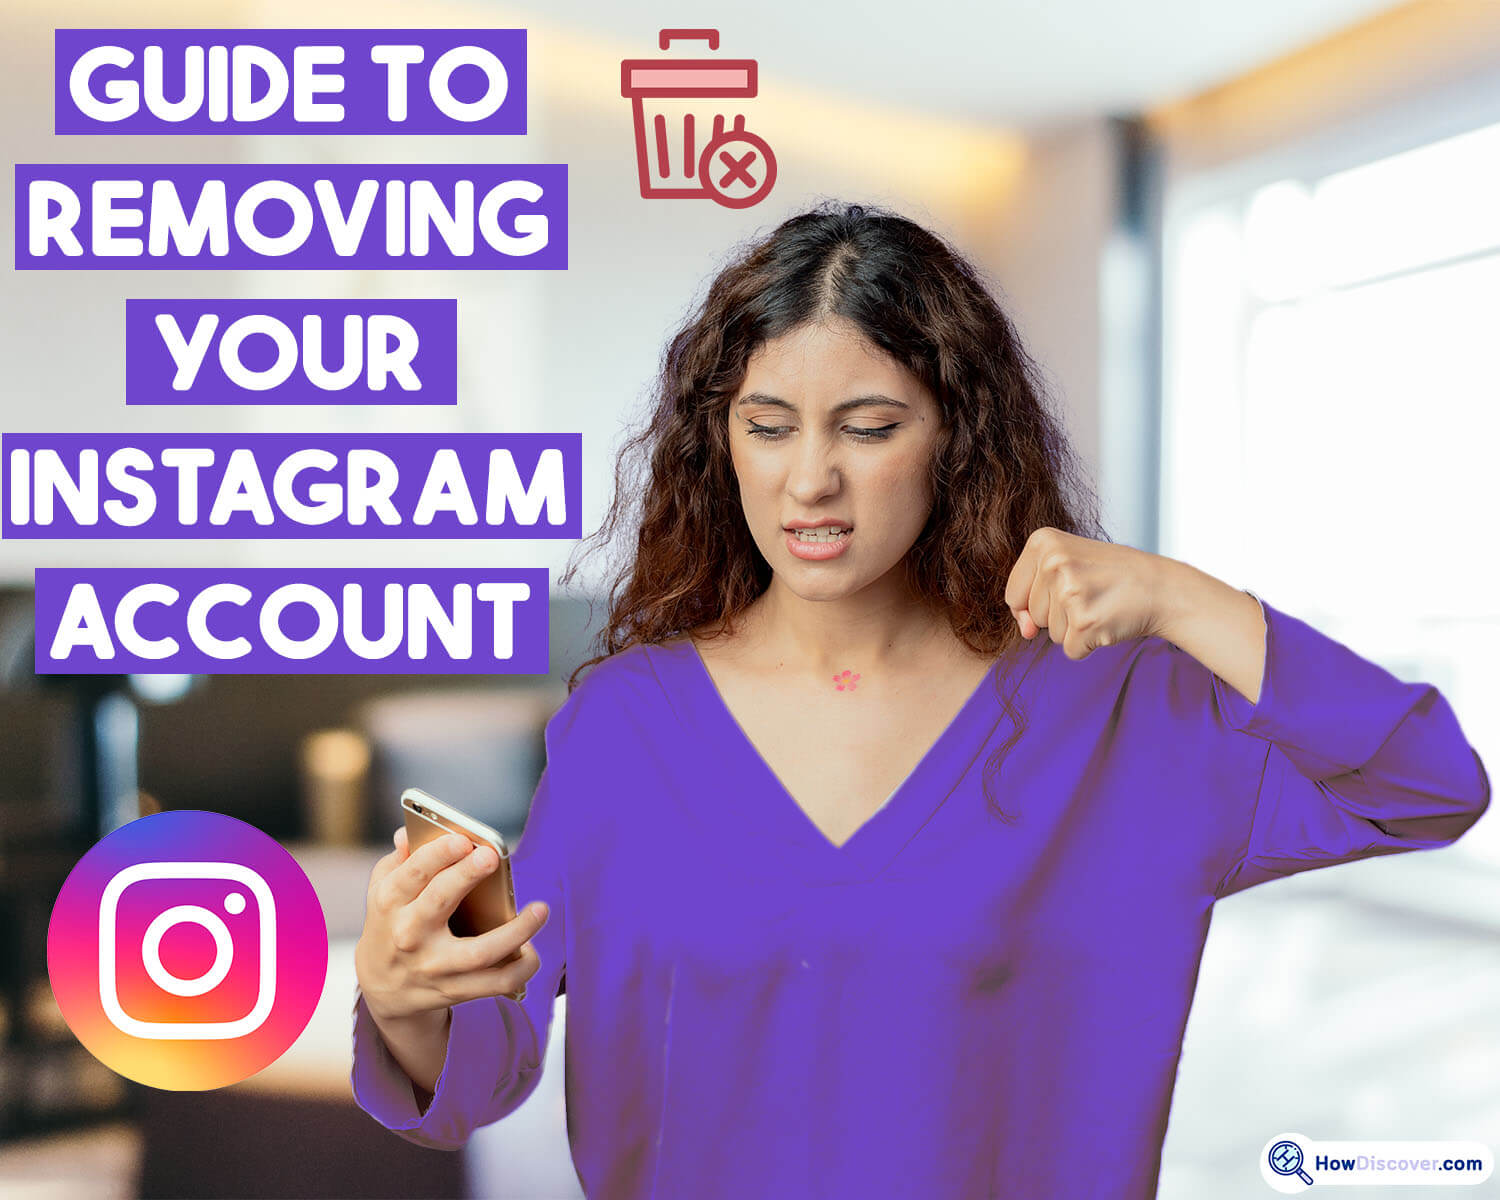 how to remove Instagram account from business - A step-by-step guide to removing your Instagram account